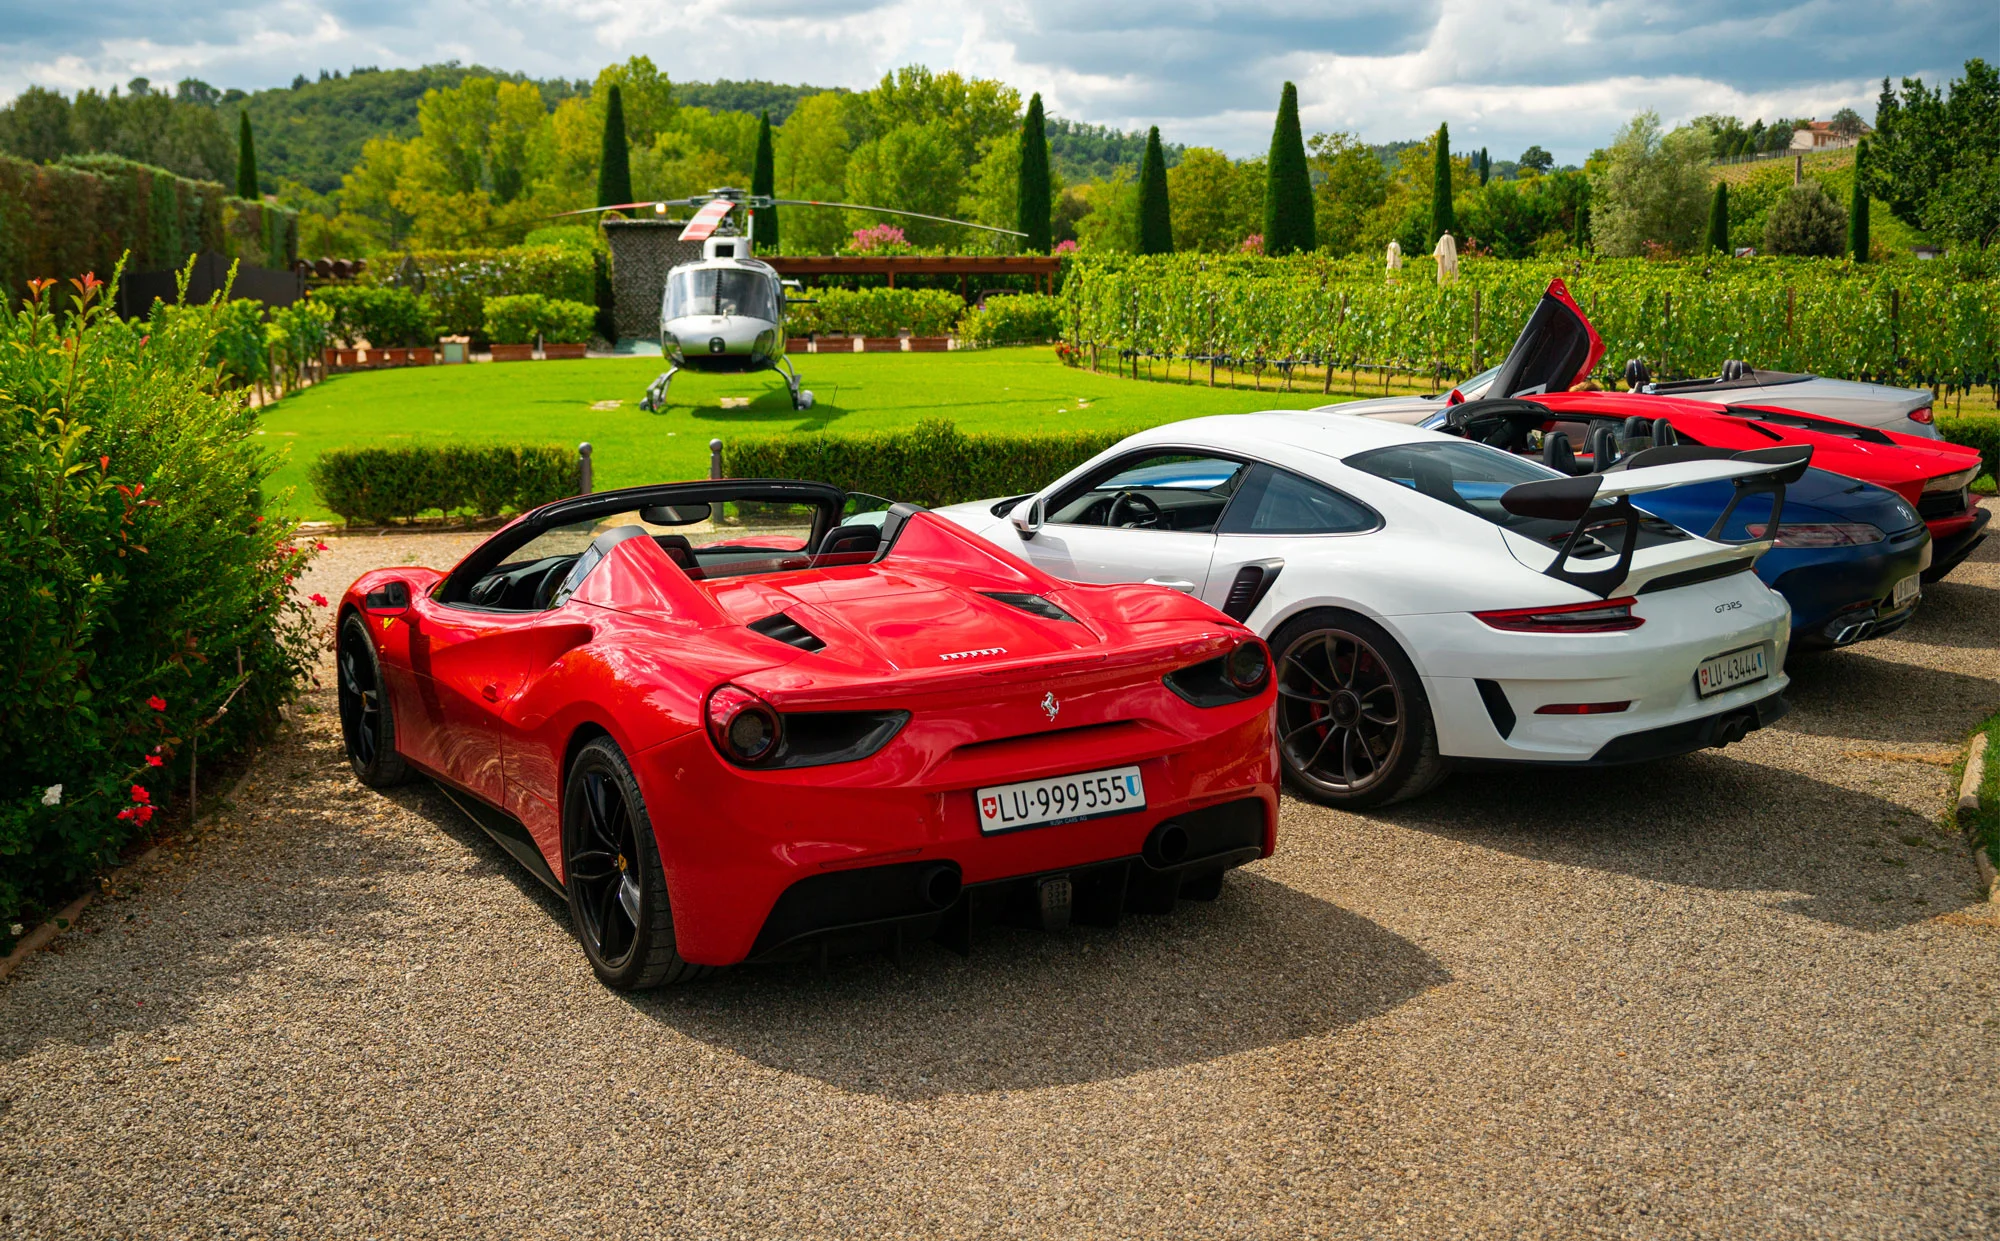 Life in the fast lane: Italian road trip by supercar and Tenuta Torciano winery with Helipads